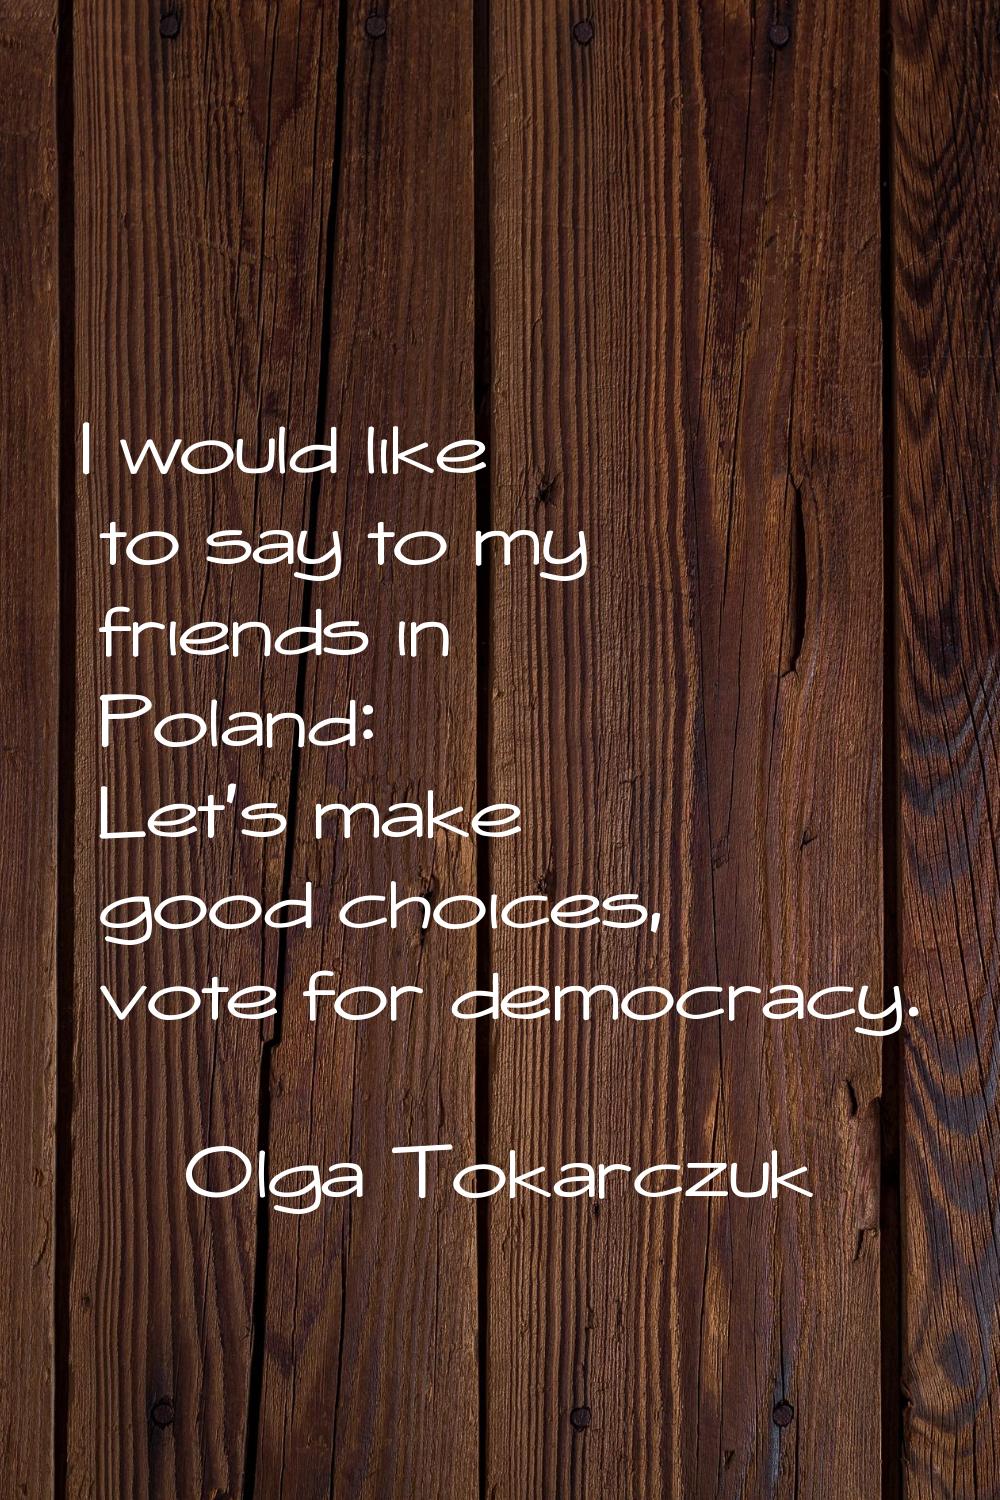 I would like to say to my friends in Poland: Let's make good choices, vote for democracy.